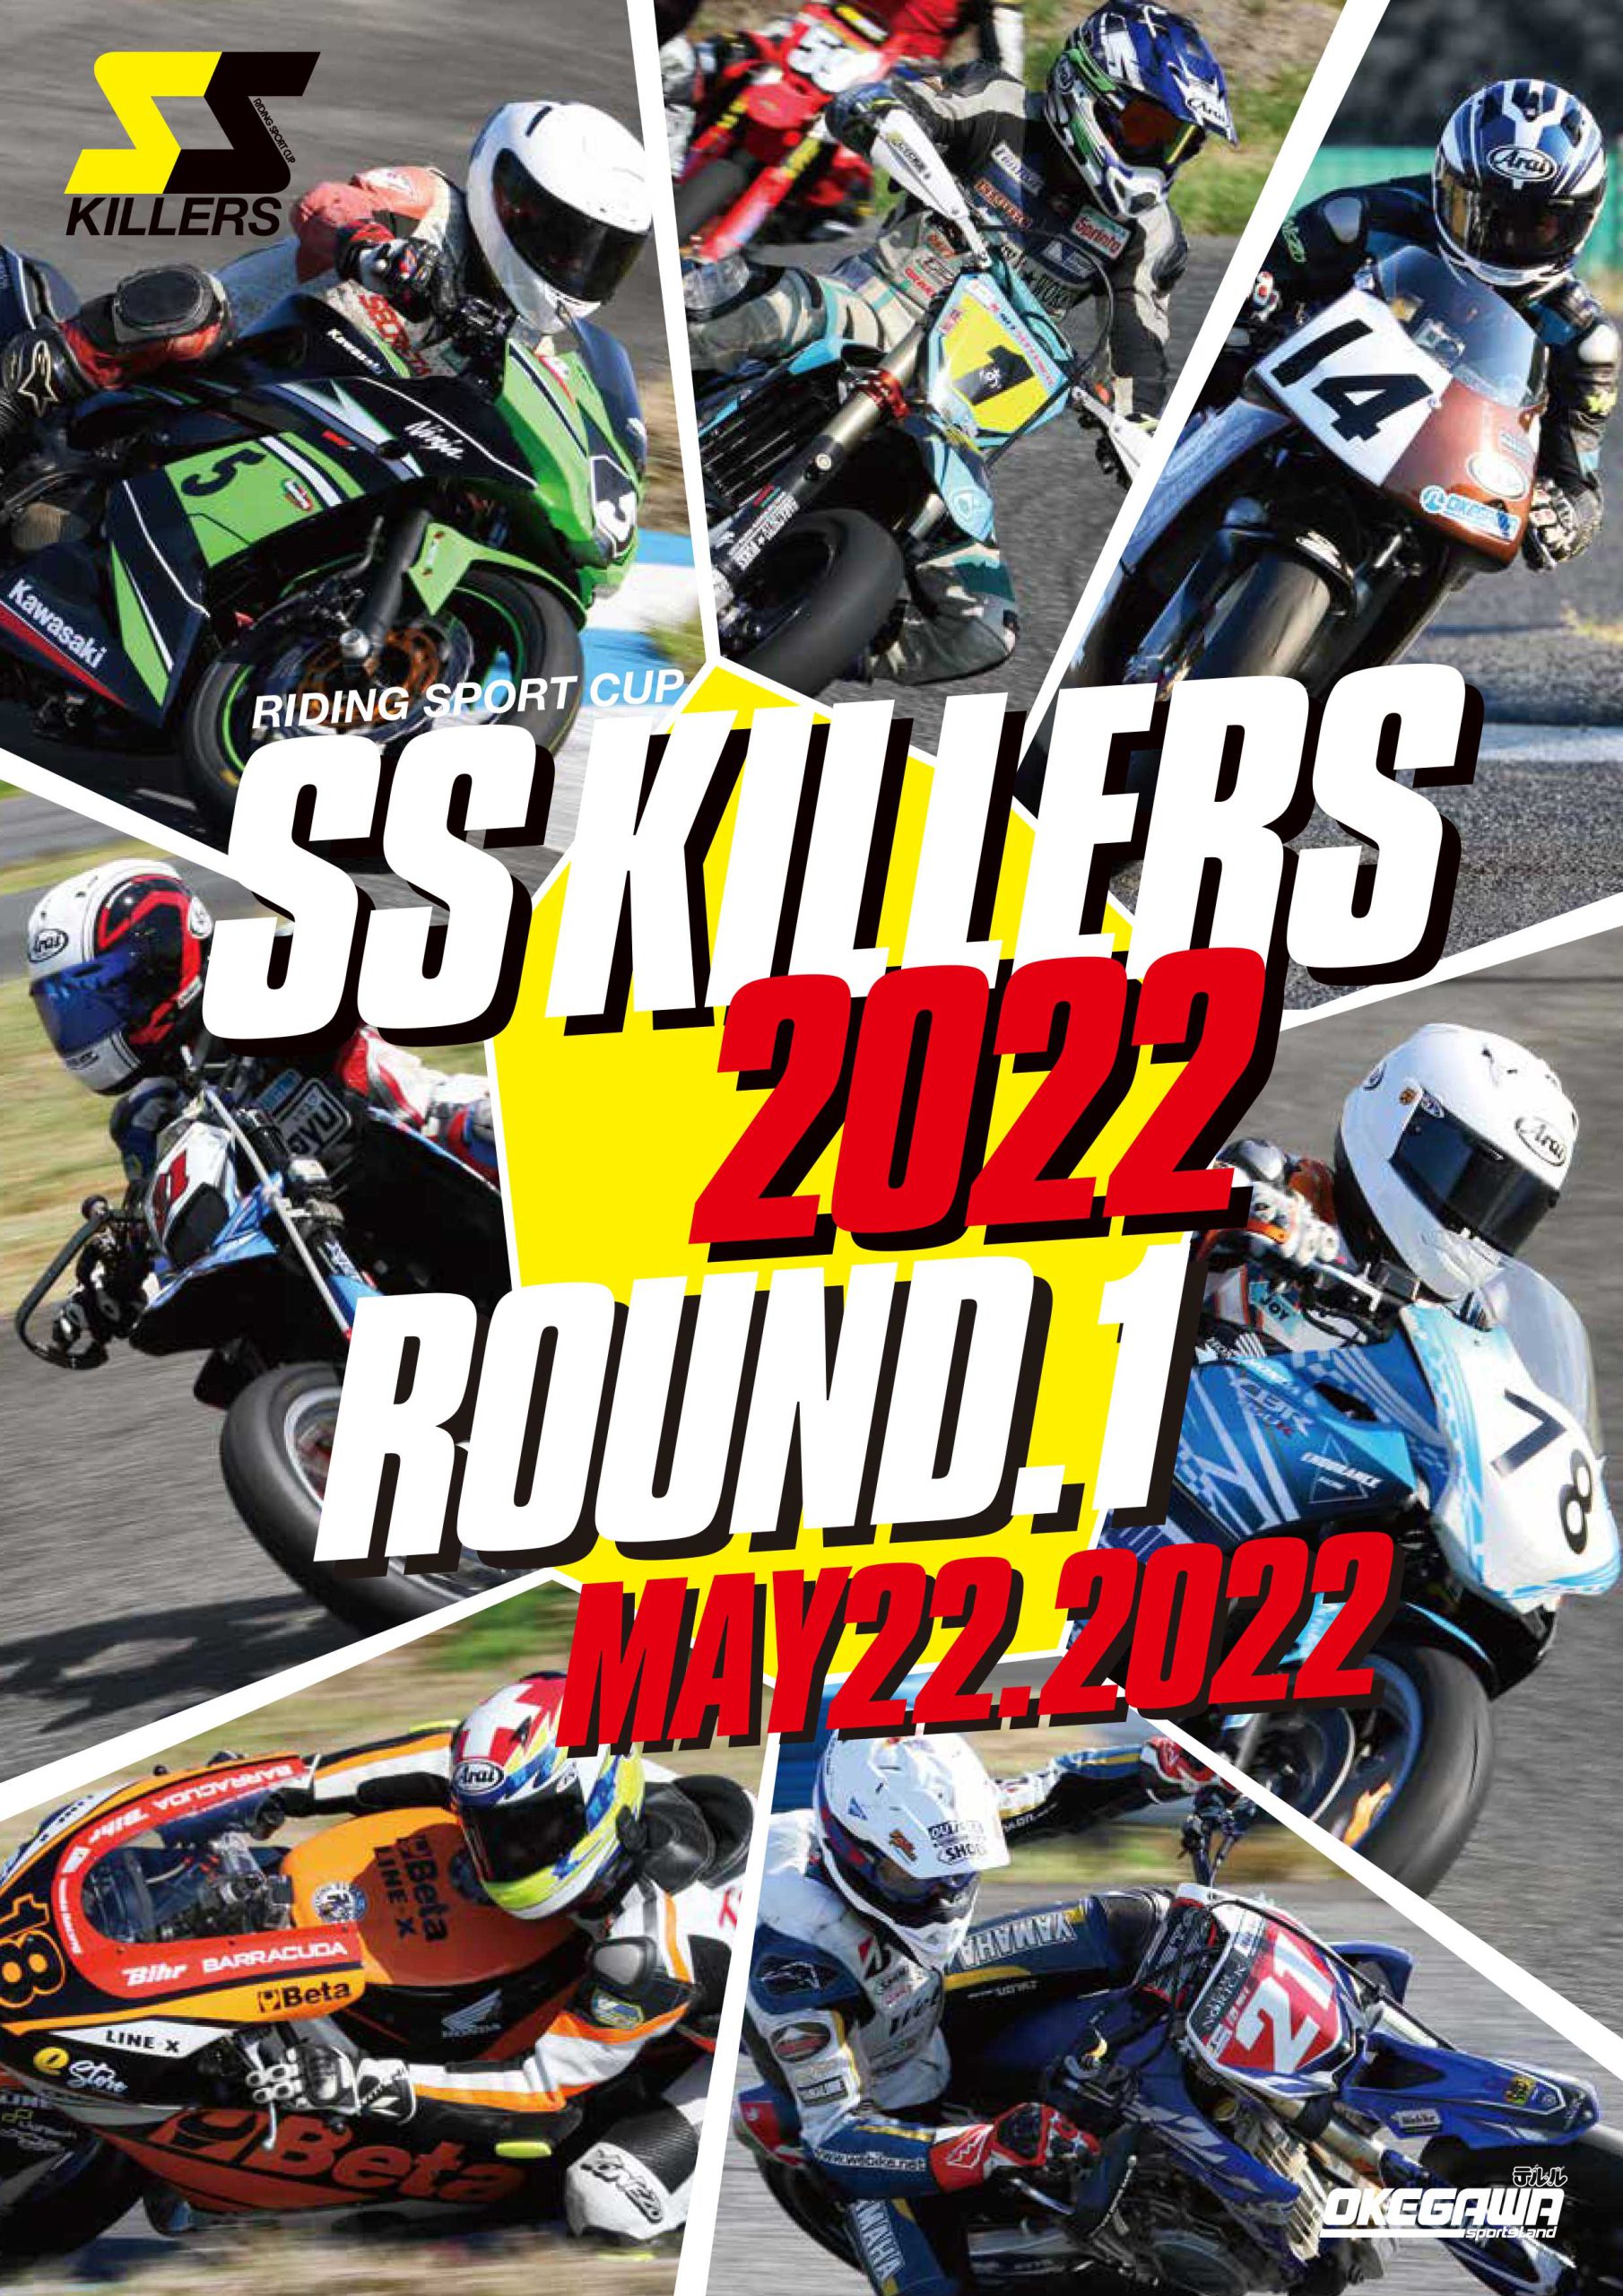 SS KILLERS 2022 RIDING SPORT CUP 第1戦 – 桶川スポーツランド